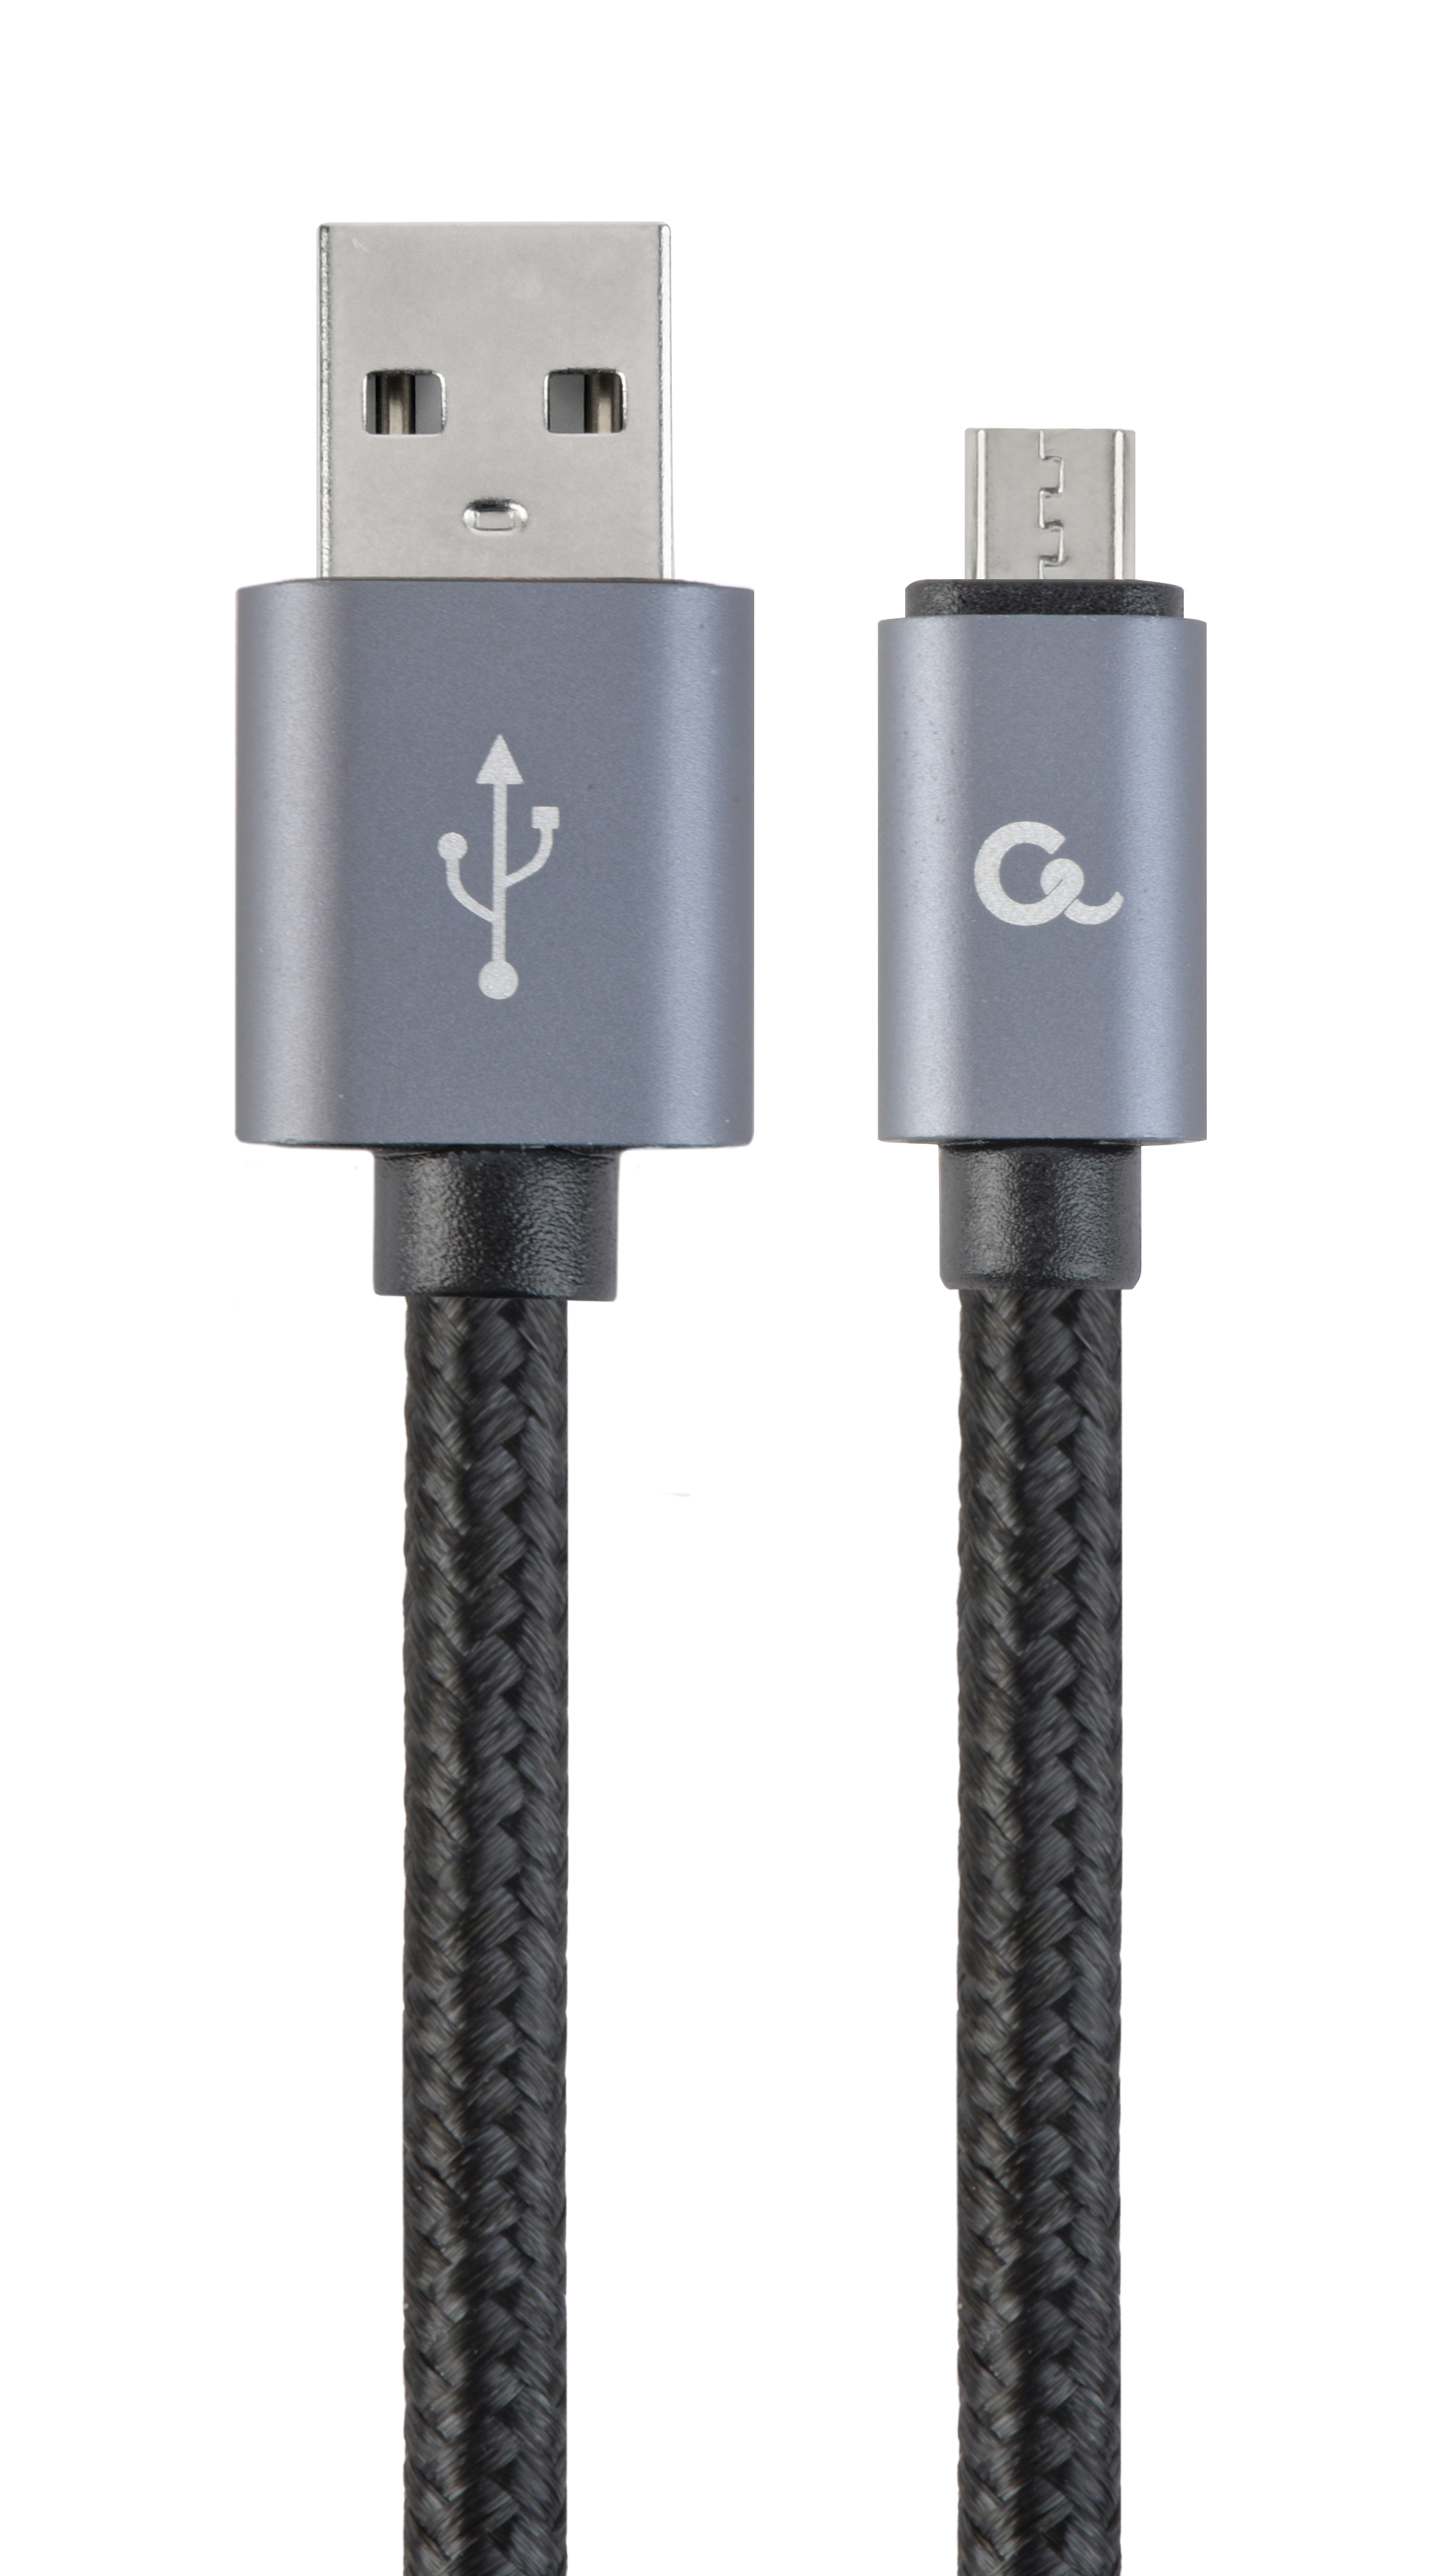 CABLEXPERT MICRO USB CABLE BLAC 1,8